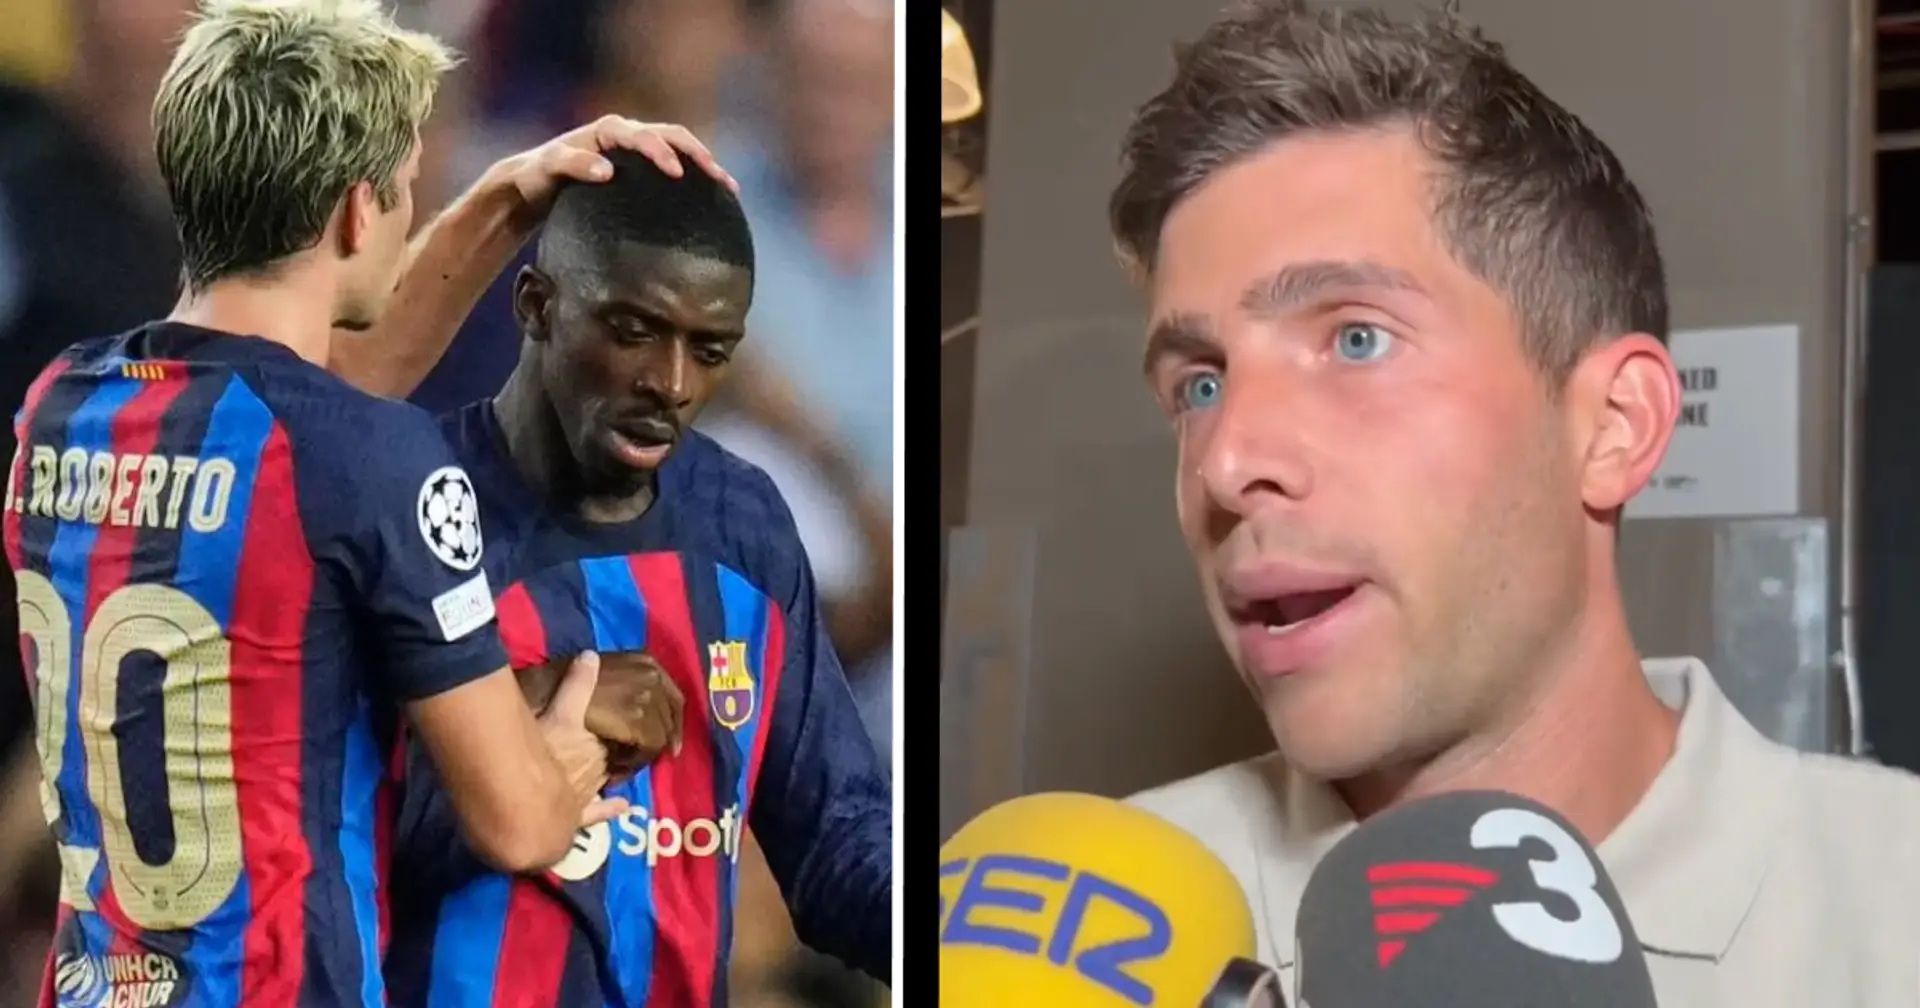 'I tried to convince him to stay, but he doesn't talk': Roberto breaks silence on Dembele exit